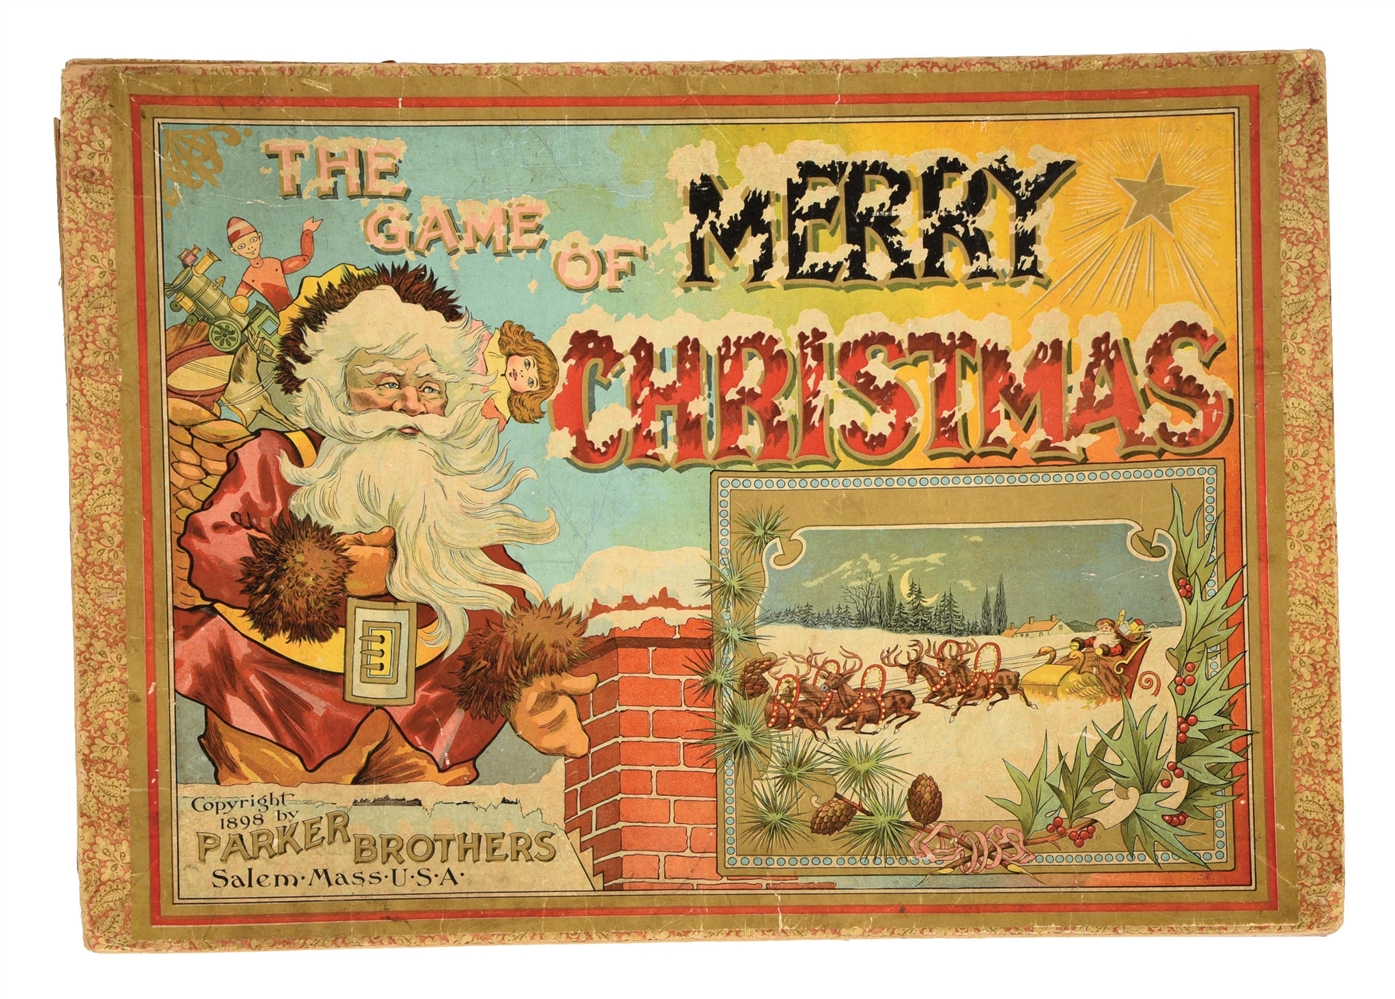 SCARCE 1898 PARKER BROTHERS GAME OF MERRY CHRISTMAS.